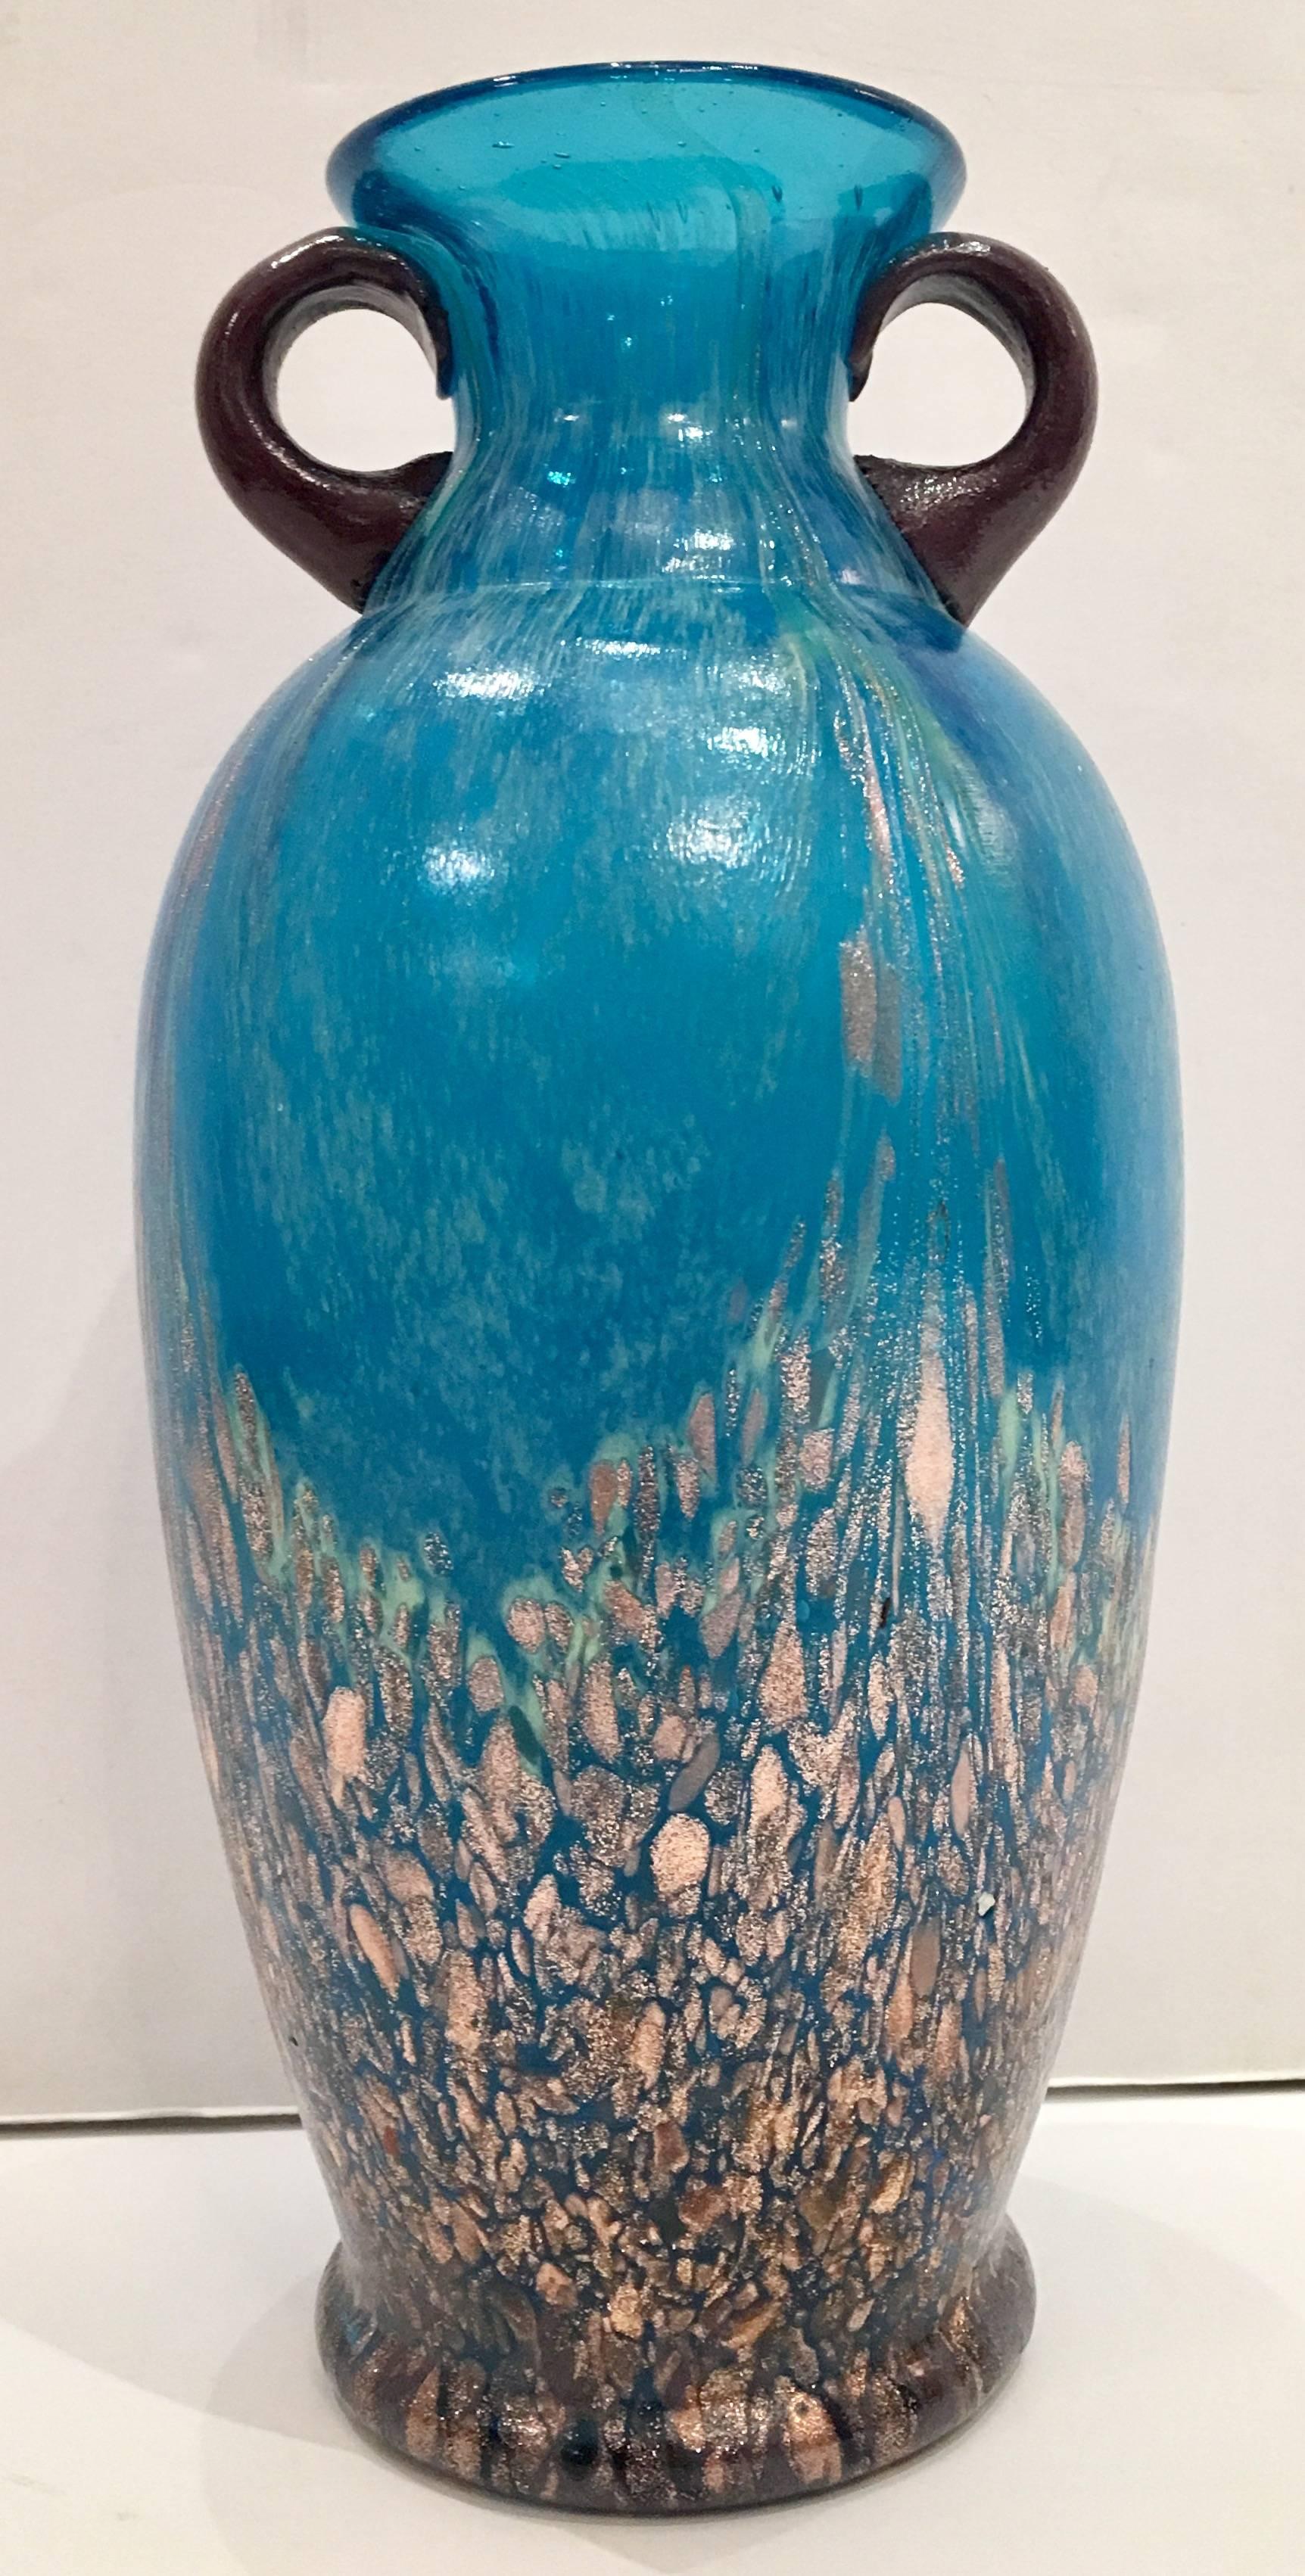 Dale Tiffany NWT Amphora Aventurine handblown art glass vase. This handblown Favrile Collection art glass vase features, vibrant blue with pulled copper, gold and applied blue glass detail. Original manufacture sticker on the underside and original